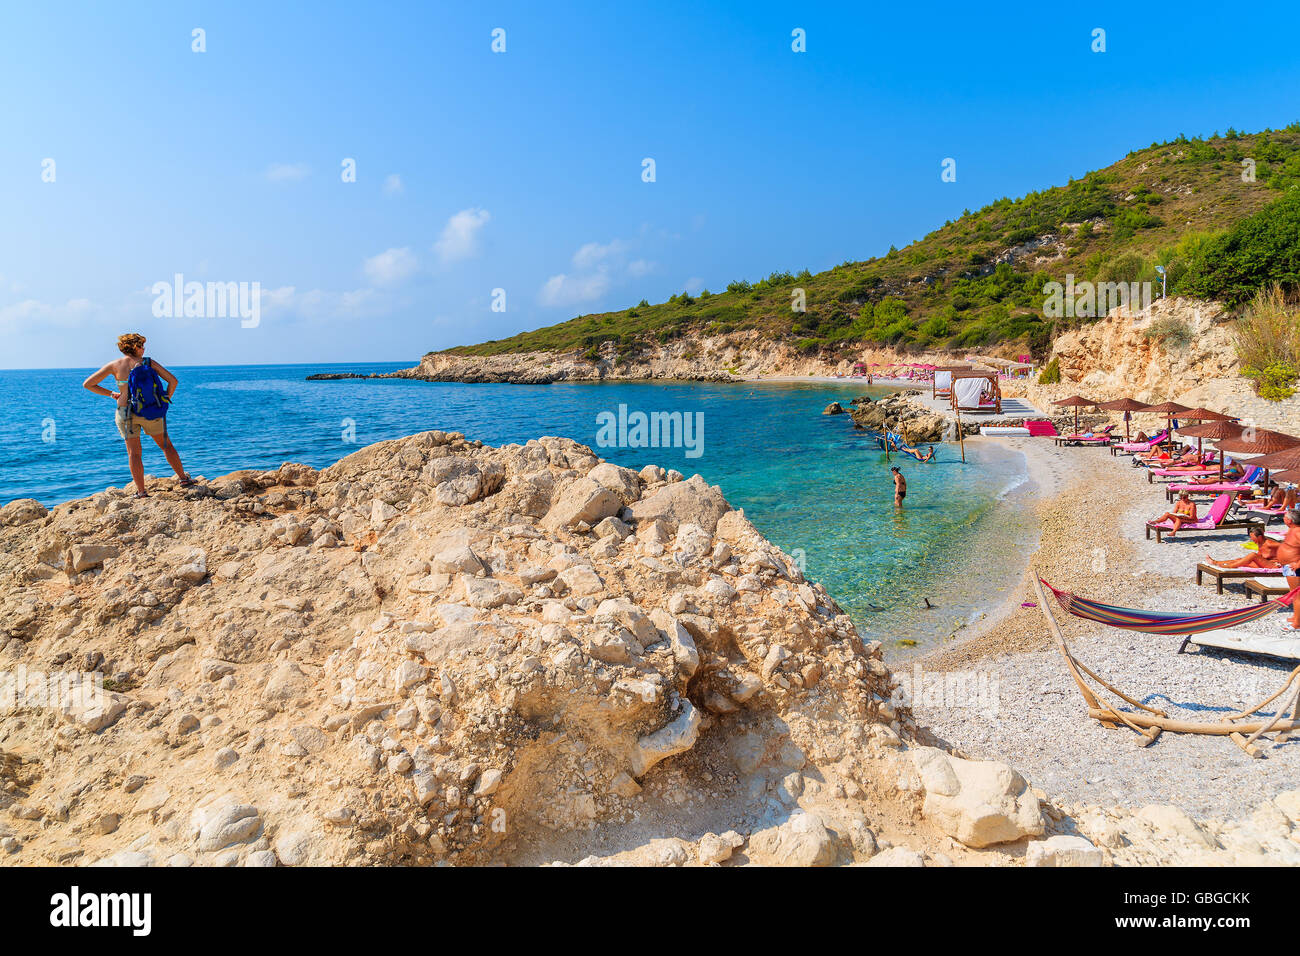 A young woman tourist standing on a rock and looking at beautiful beach in Proteas bay, Samos island, Greece Stock Photo